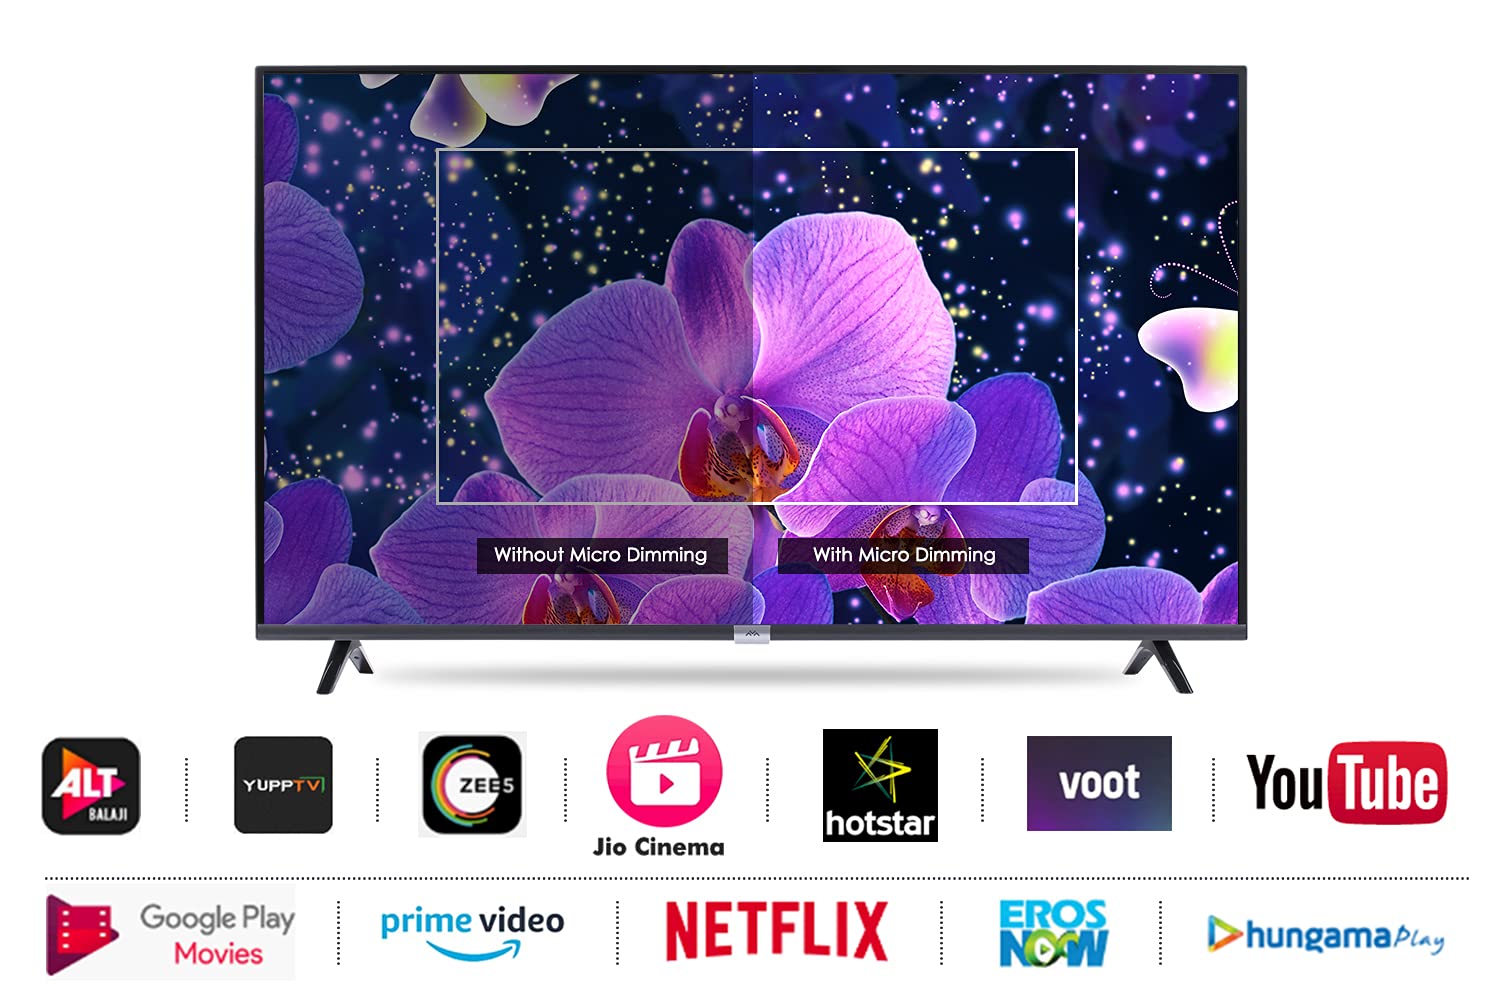 iFFalcon 40 Inch LED Full HD TV (40F2A) Online at Lowest Price in India